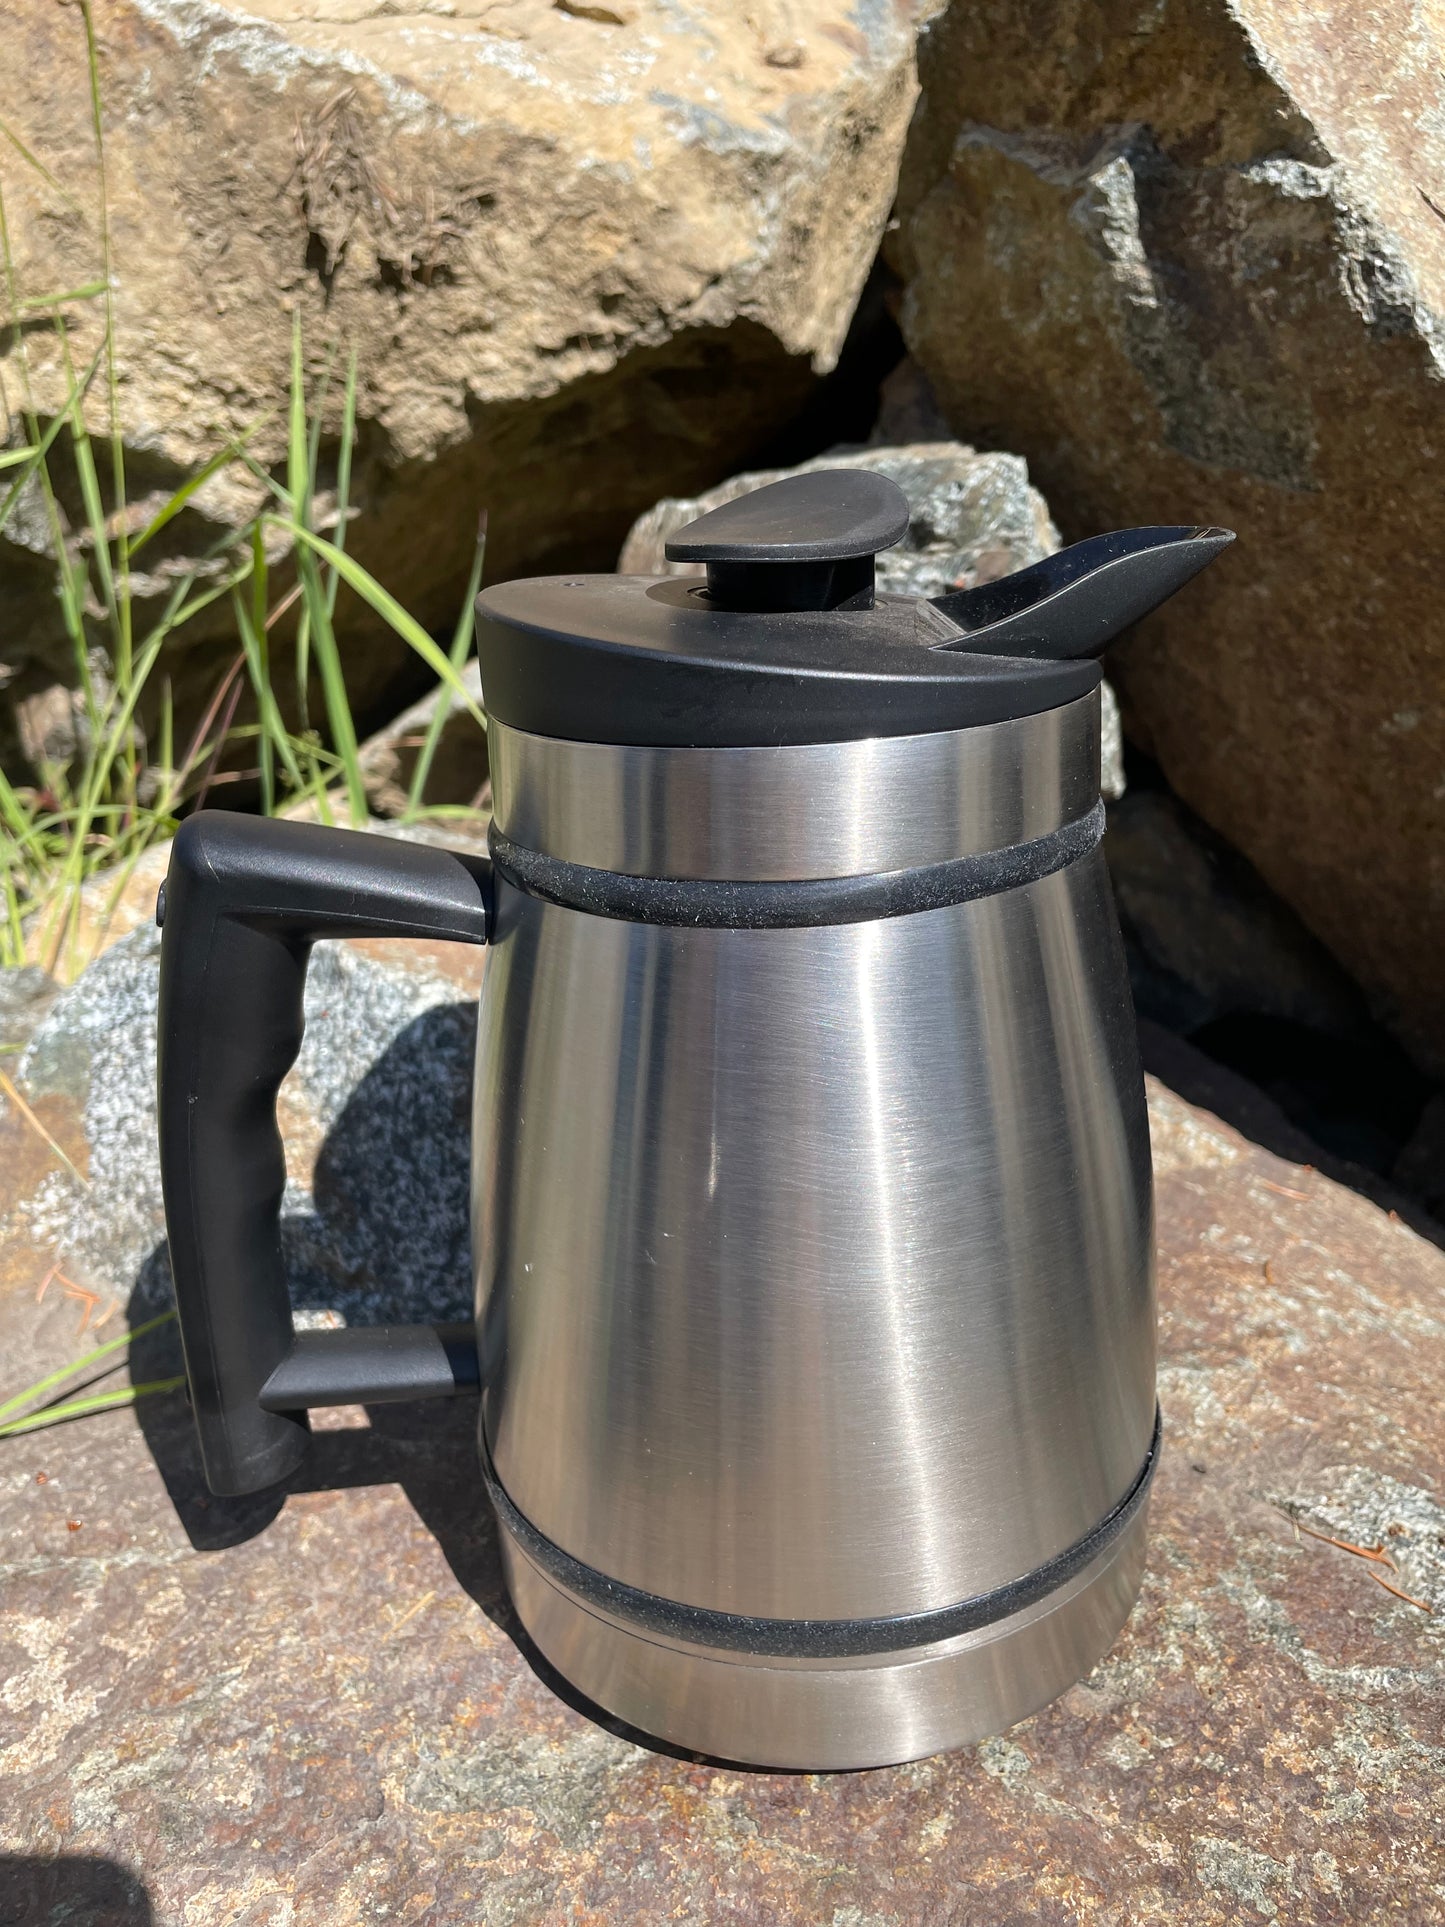 PLANETARY DESIGN FRENCH PRESS WITH BRÜ-STOP